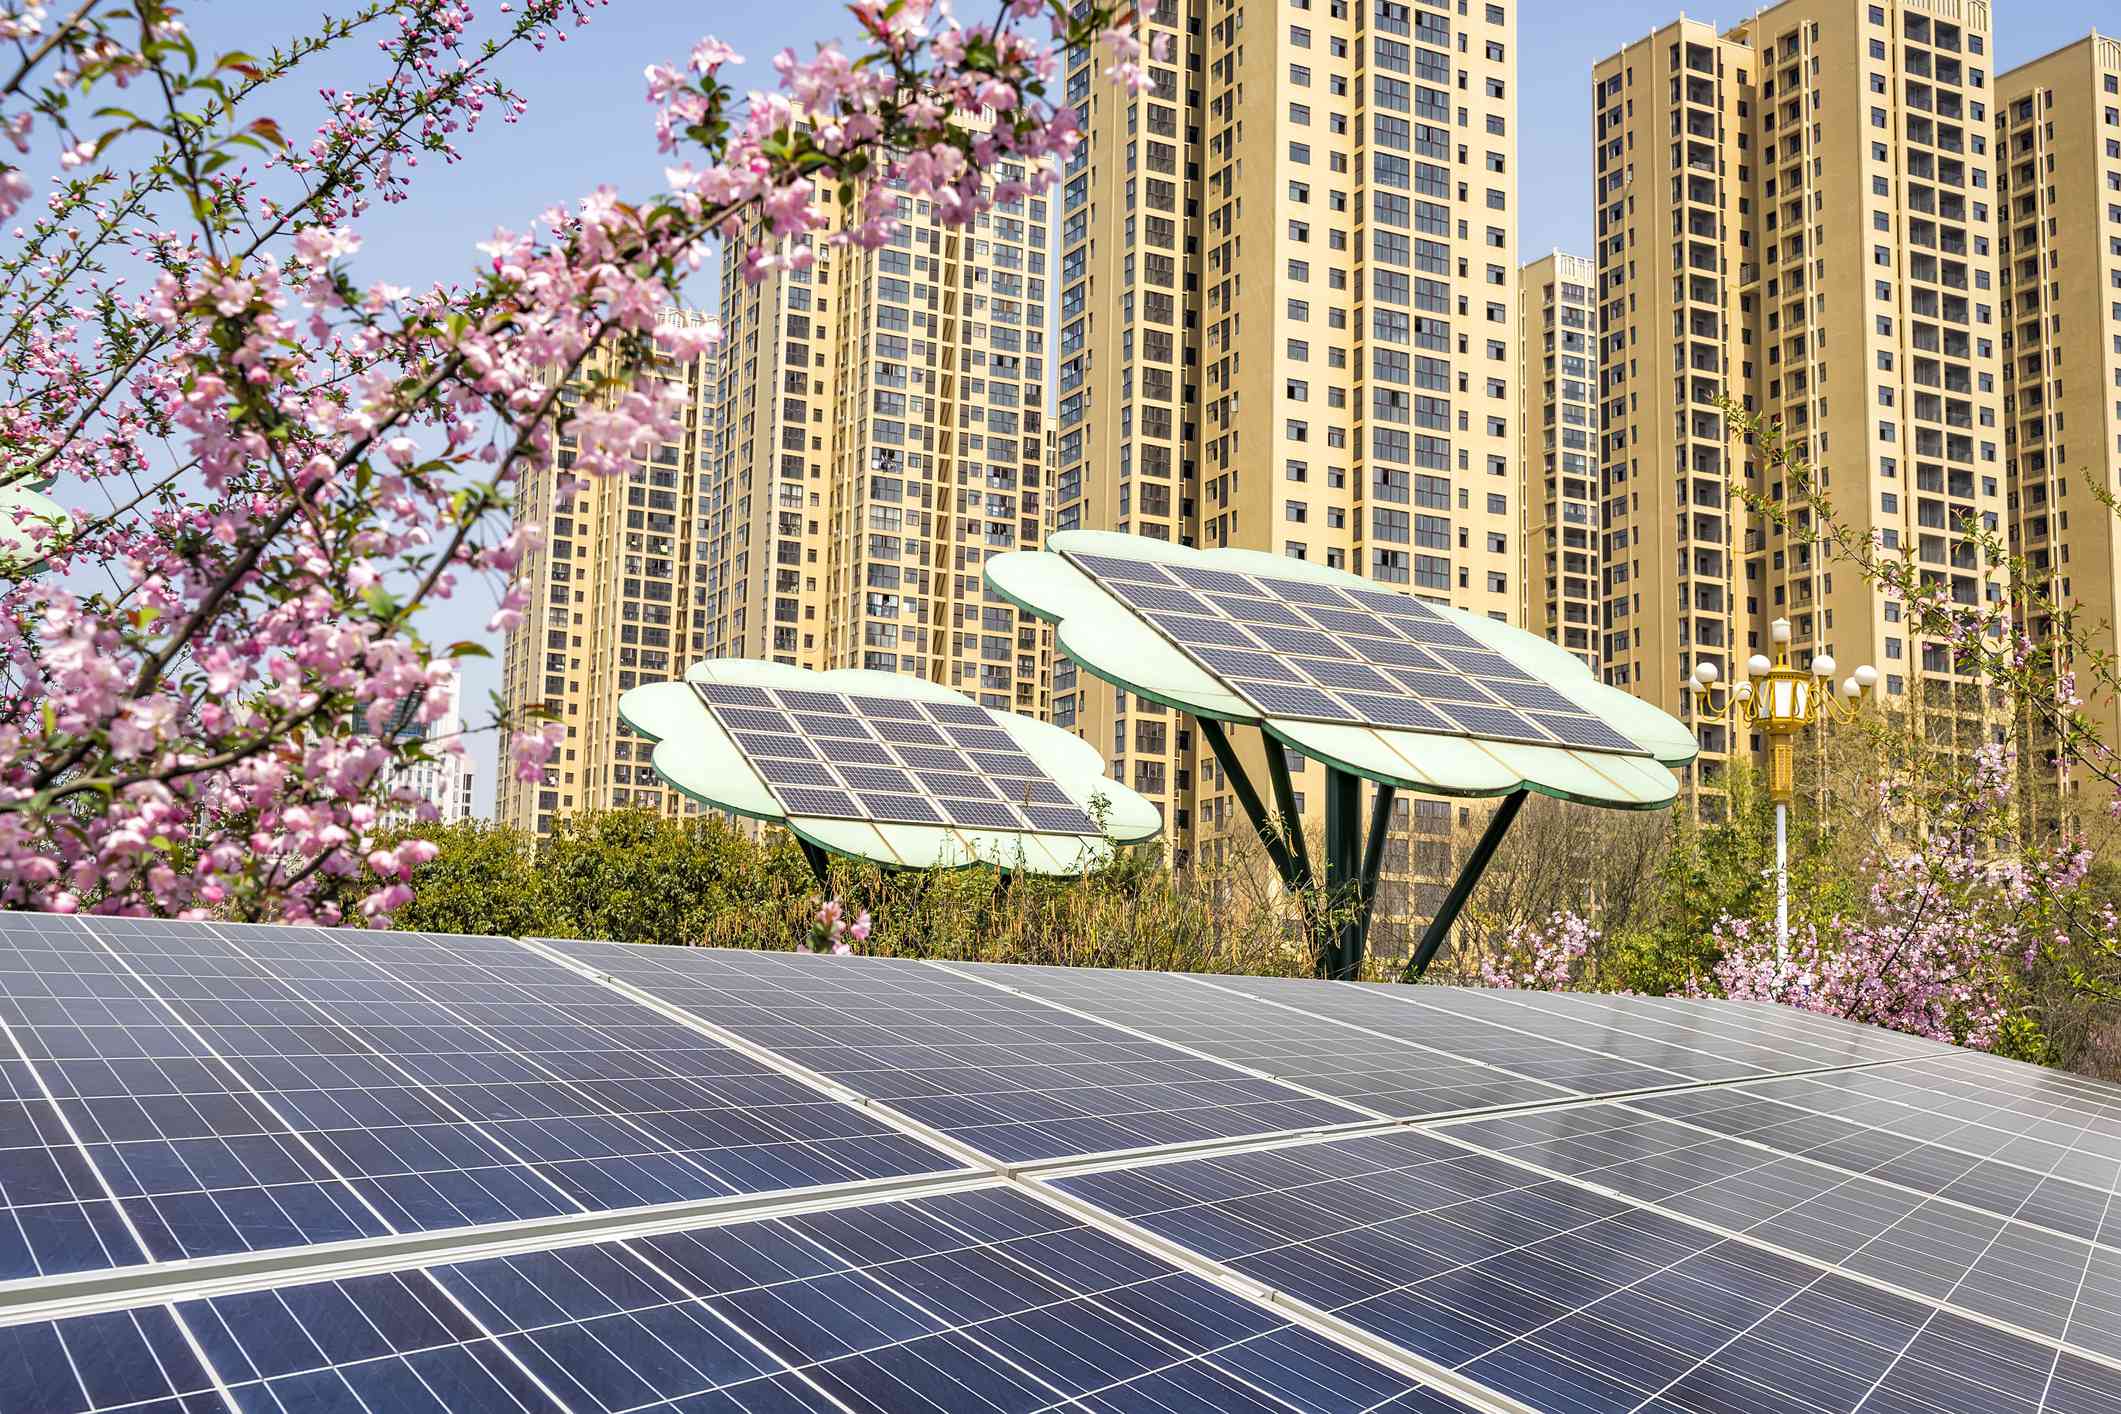 Rooftop solar panels with flower-shaped solar trees, pink blossoms, and high rises in background